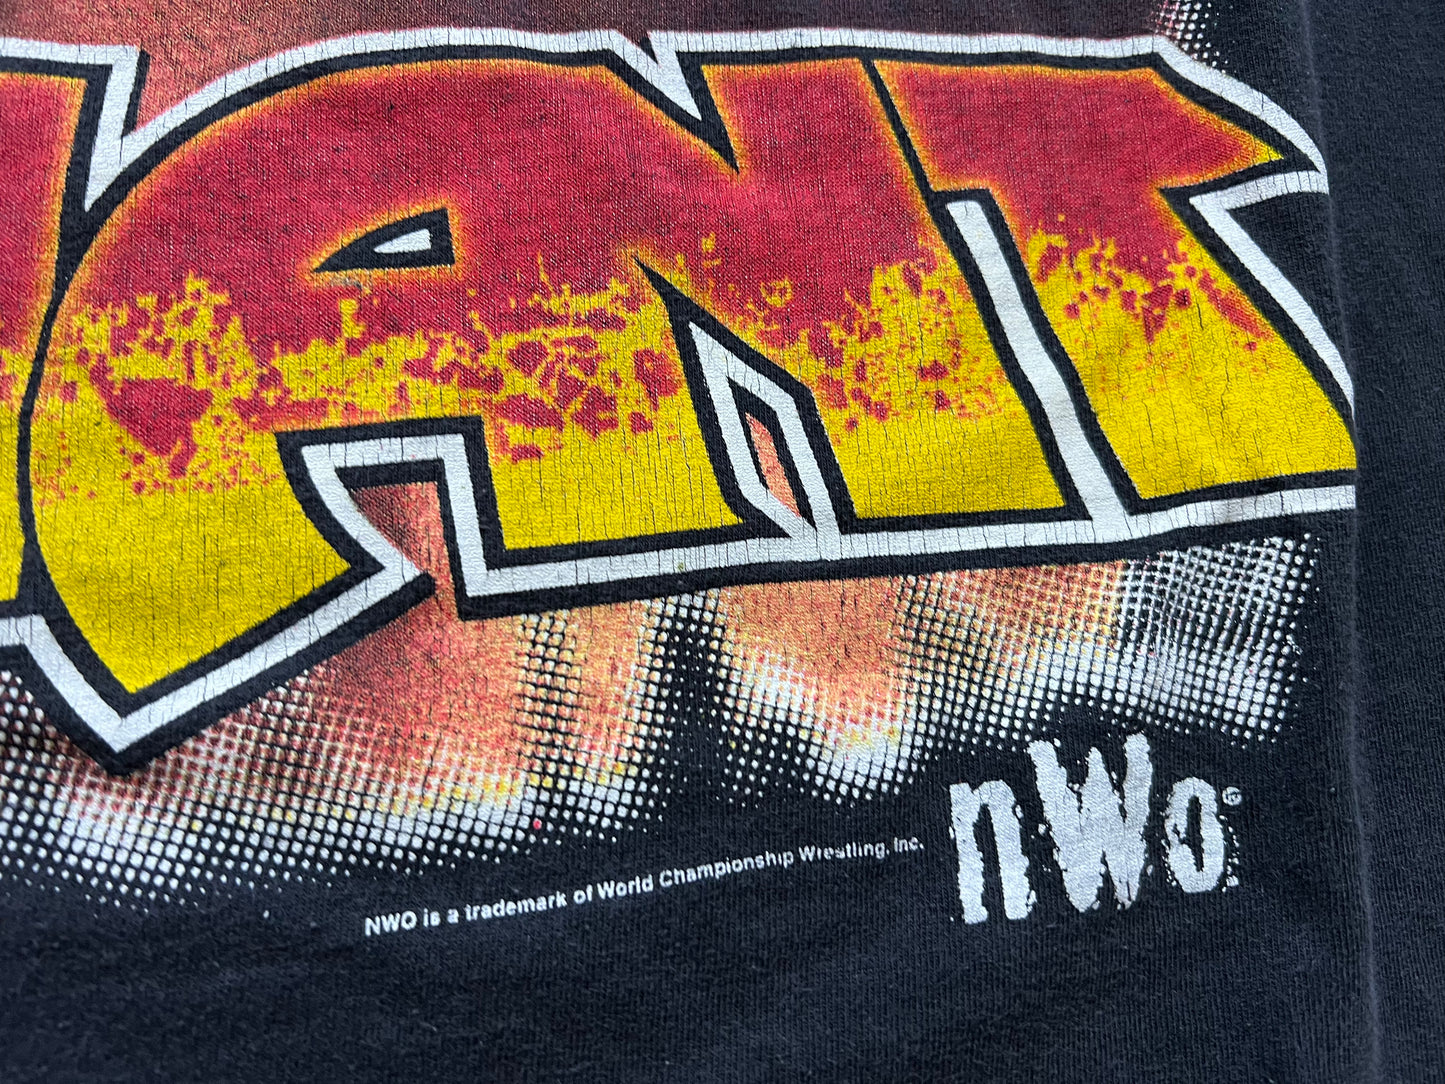 1998 WCW / n.W.o. The Giant two sided shirt